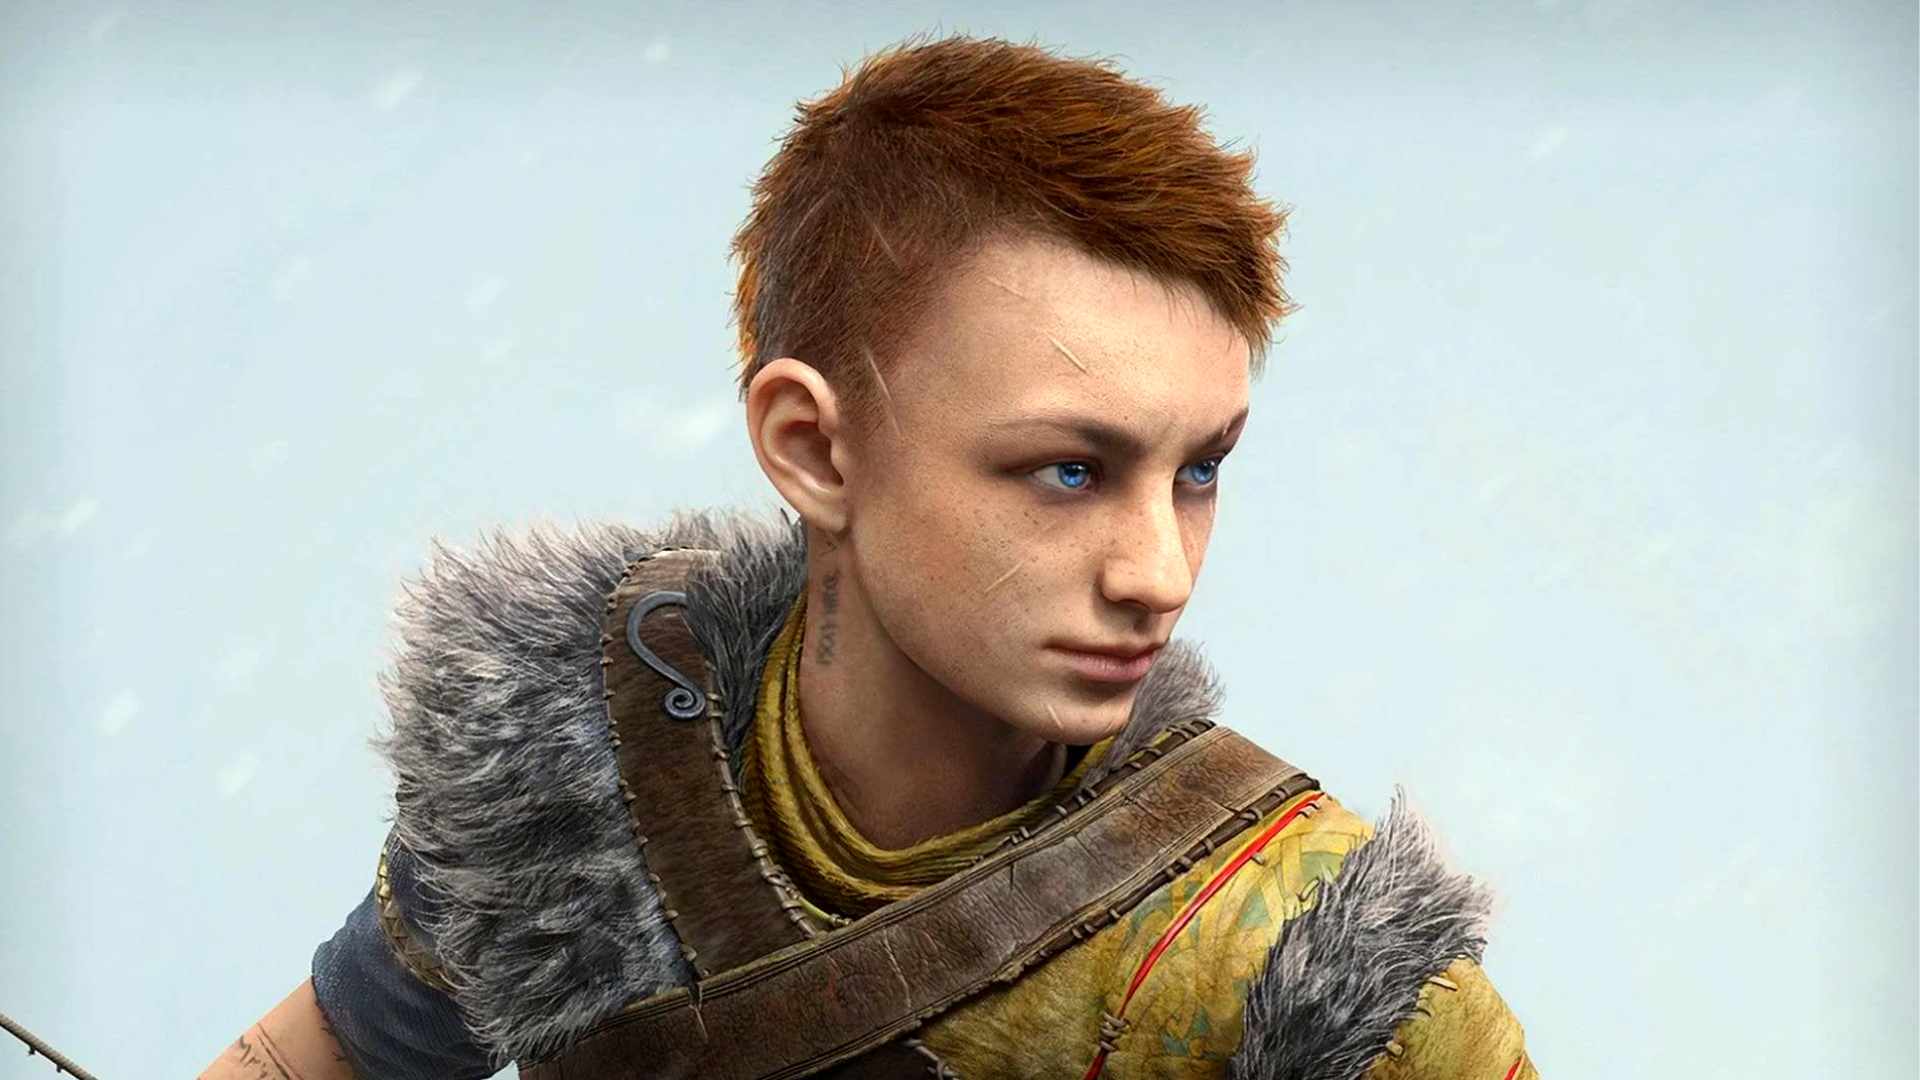 Some fans believe that a standalone expansion could focus on Atreus's quest to find the surviving Giants.